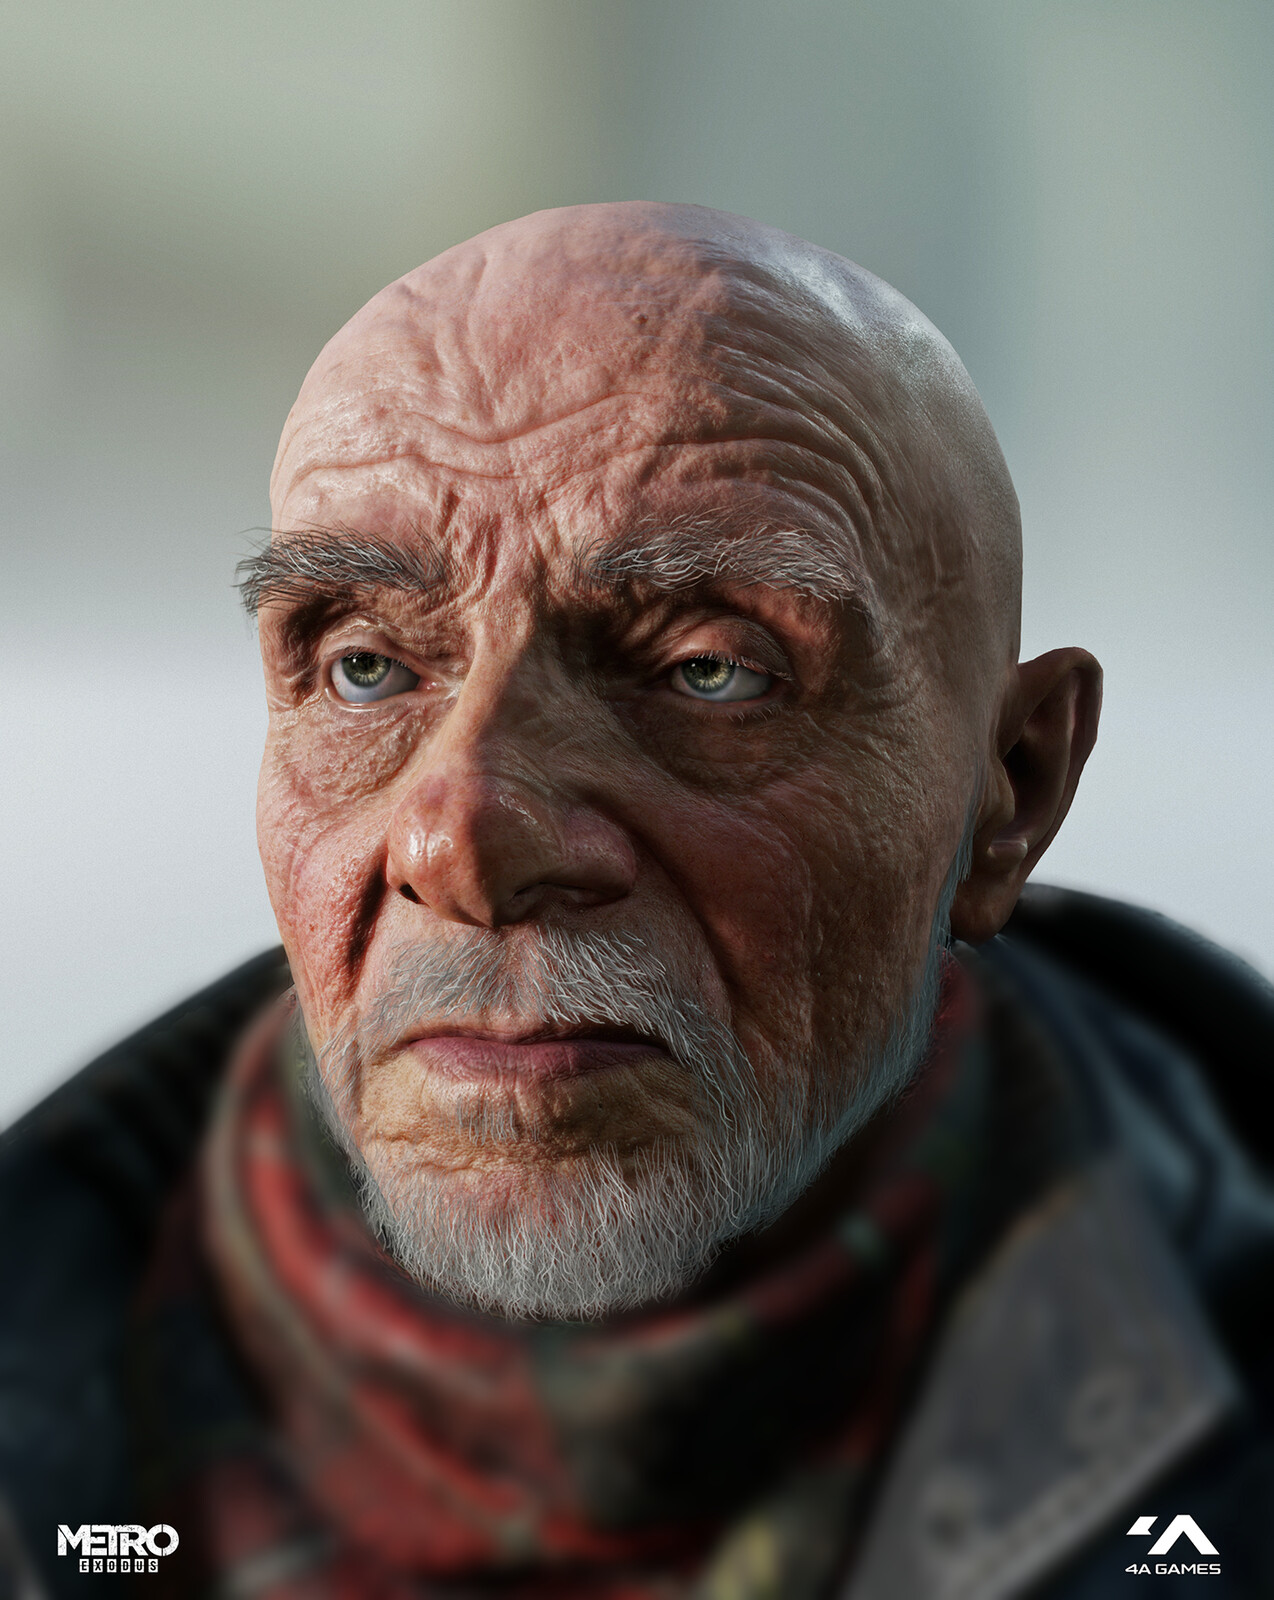 Game model rendered in 4a Engine. Beard and clothing done by another artists 